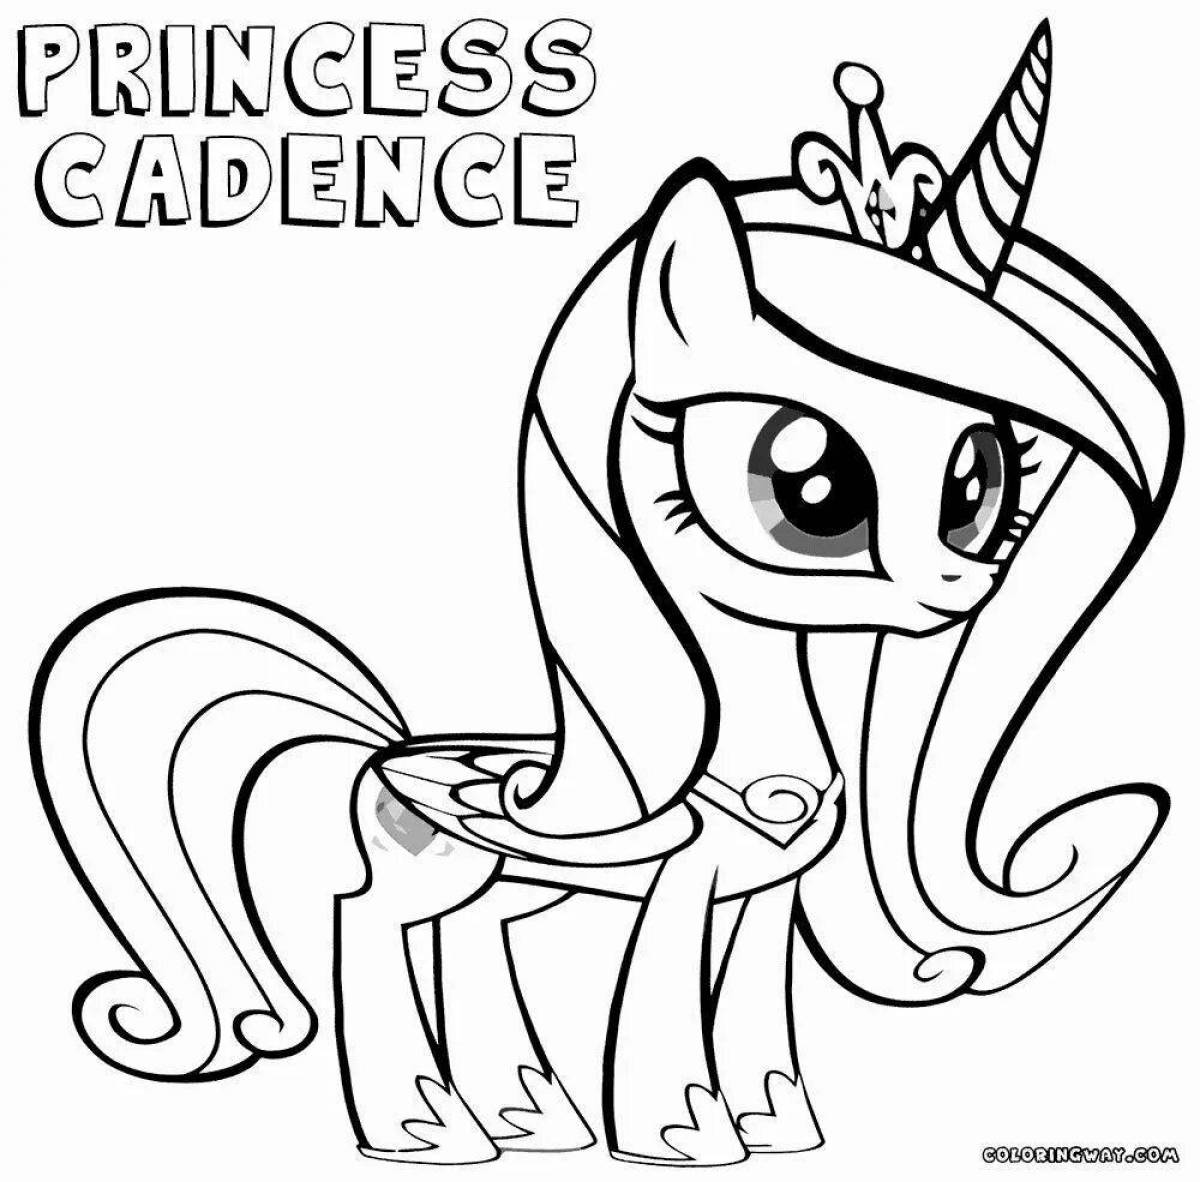 Great coloring pony cadence